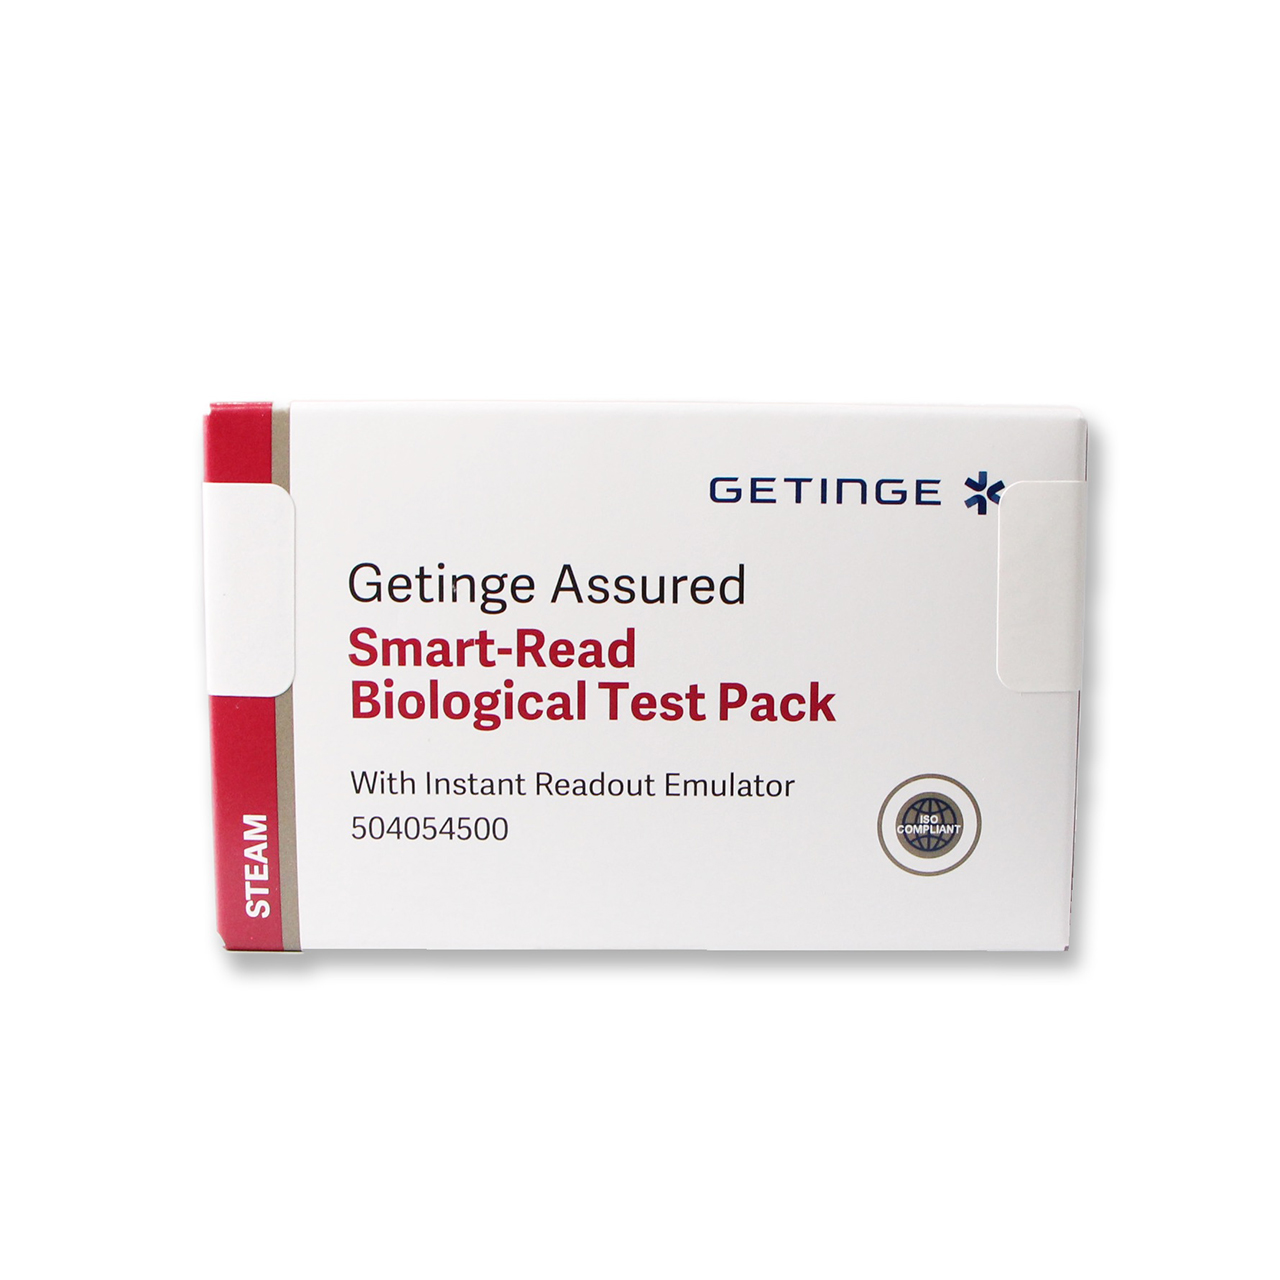 Getinge Assured Smart-Read Biological Test Pack is a PCD for pre-vacuum steam sterilizers operating at 134C